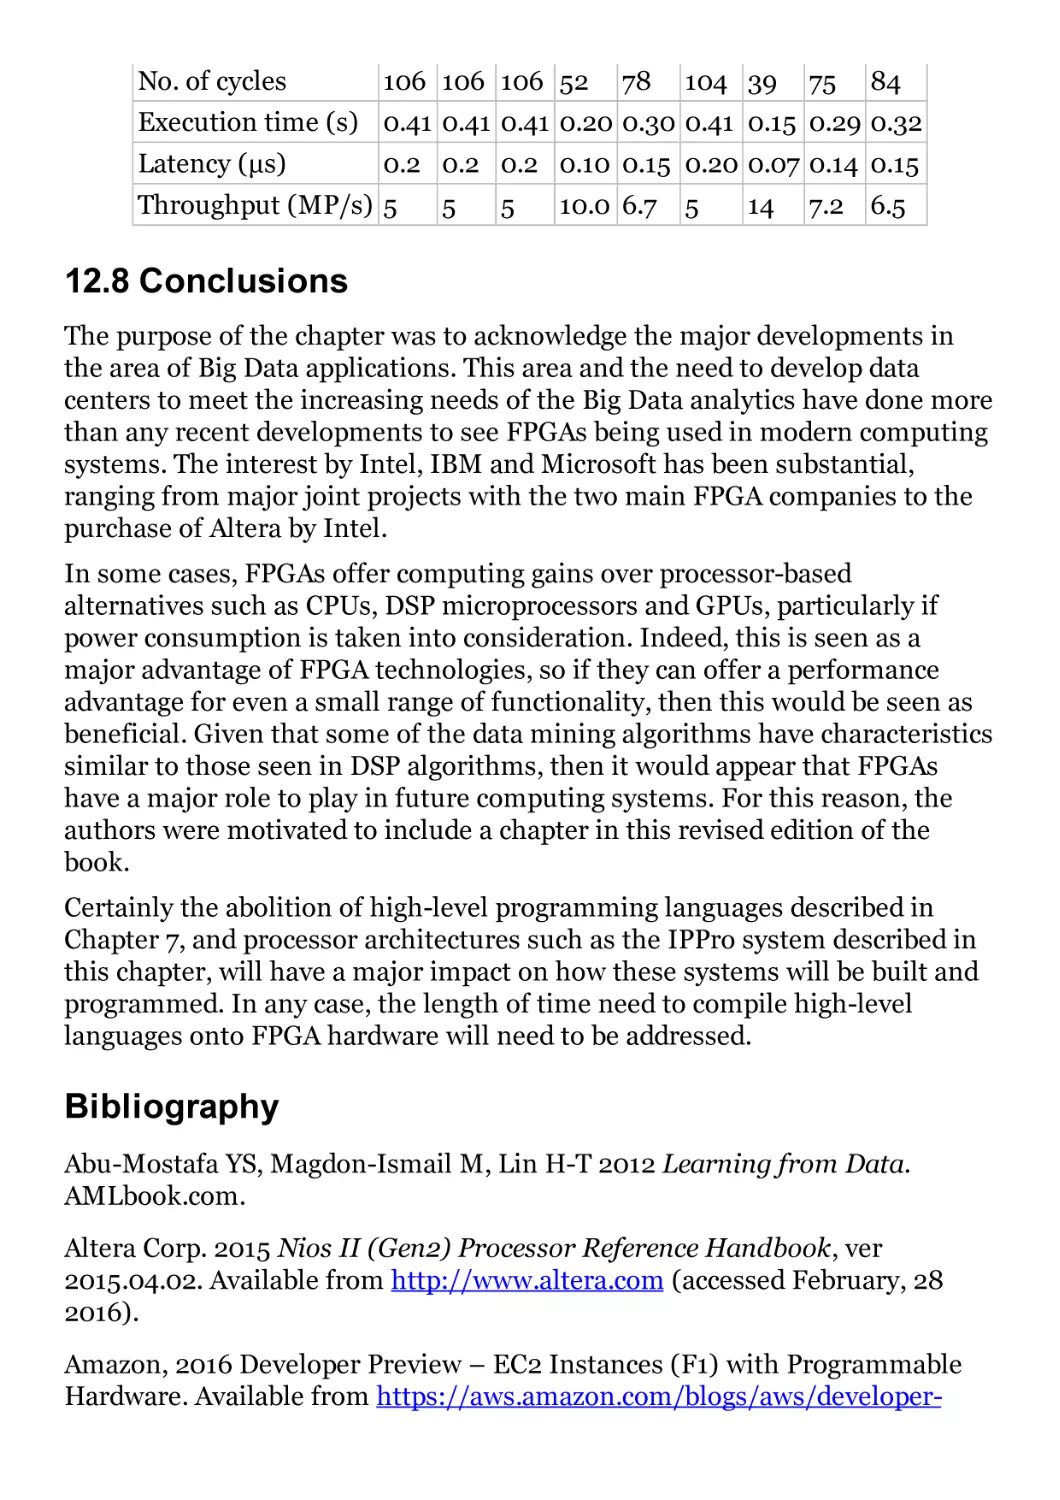 12.8 Conclusions
Bibliography